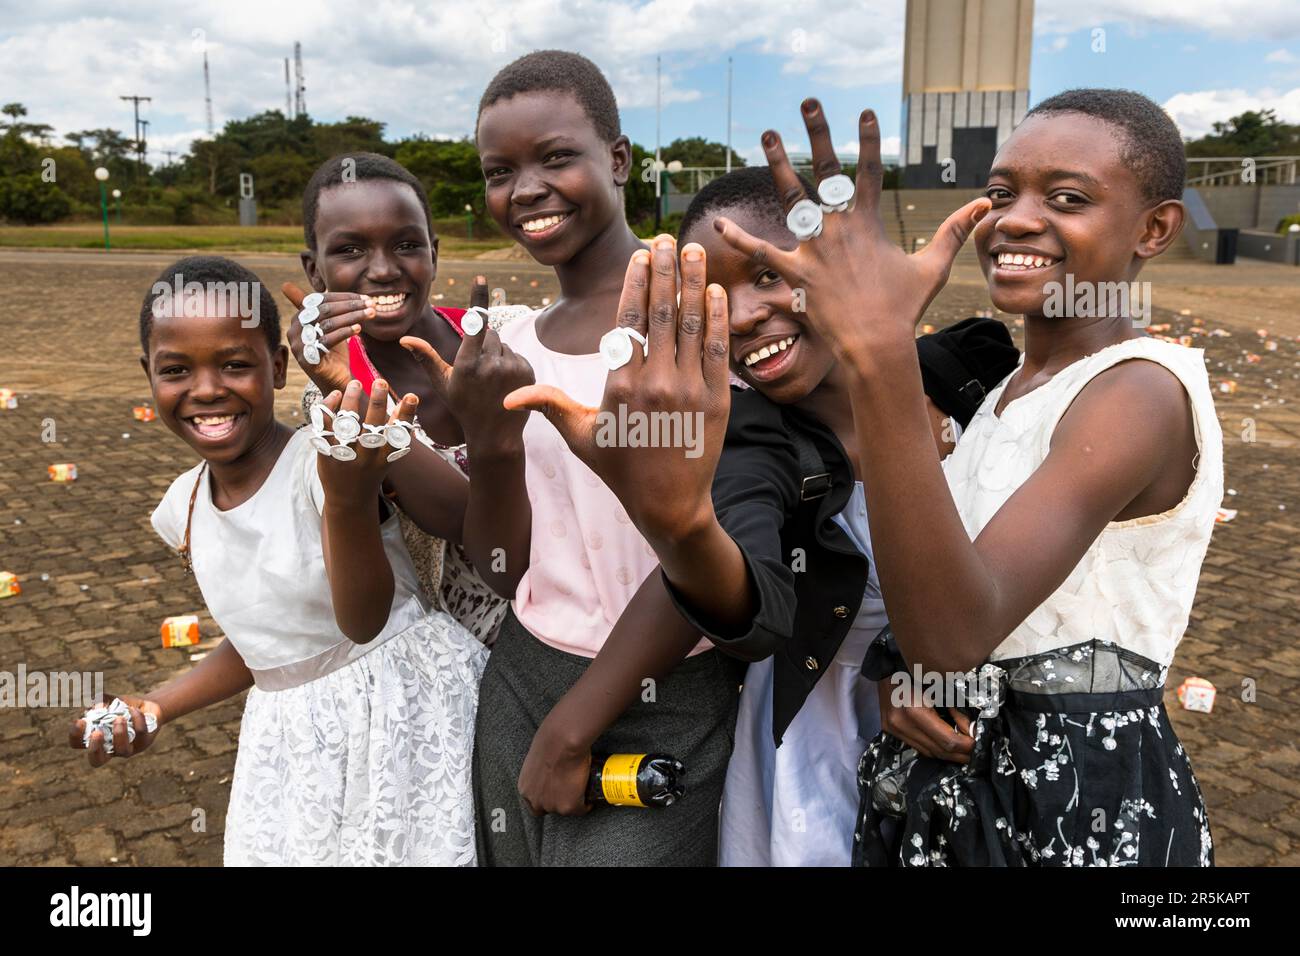 Young girls collect the cap rings of the maheu packs discarded on the national holiday in honor of Malawi's first president (Hastings Kamuzu Banda) to make jewelry. Maheu or Mahewu is a typical drink in Malawi made from fermented maize. Lilongwe, Malawi Stock Photo